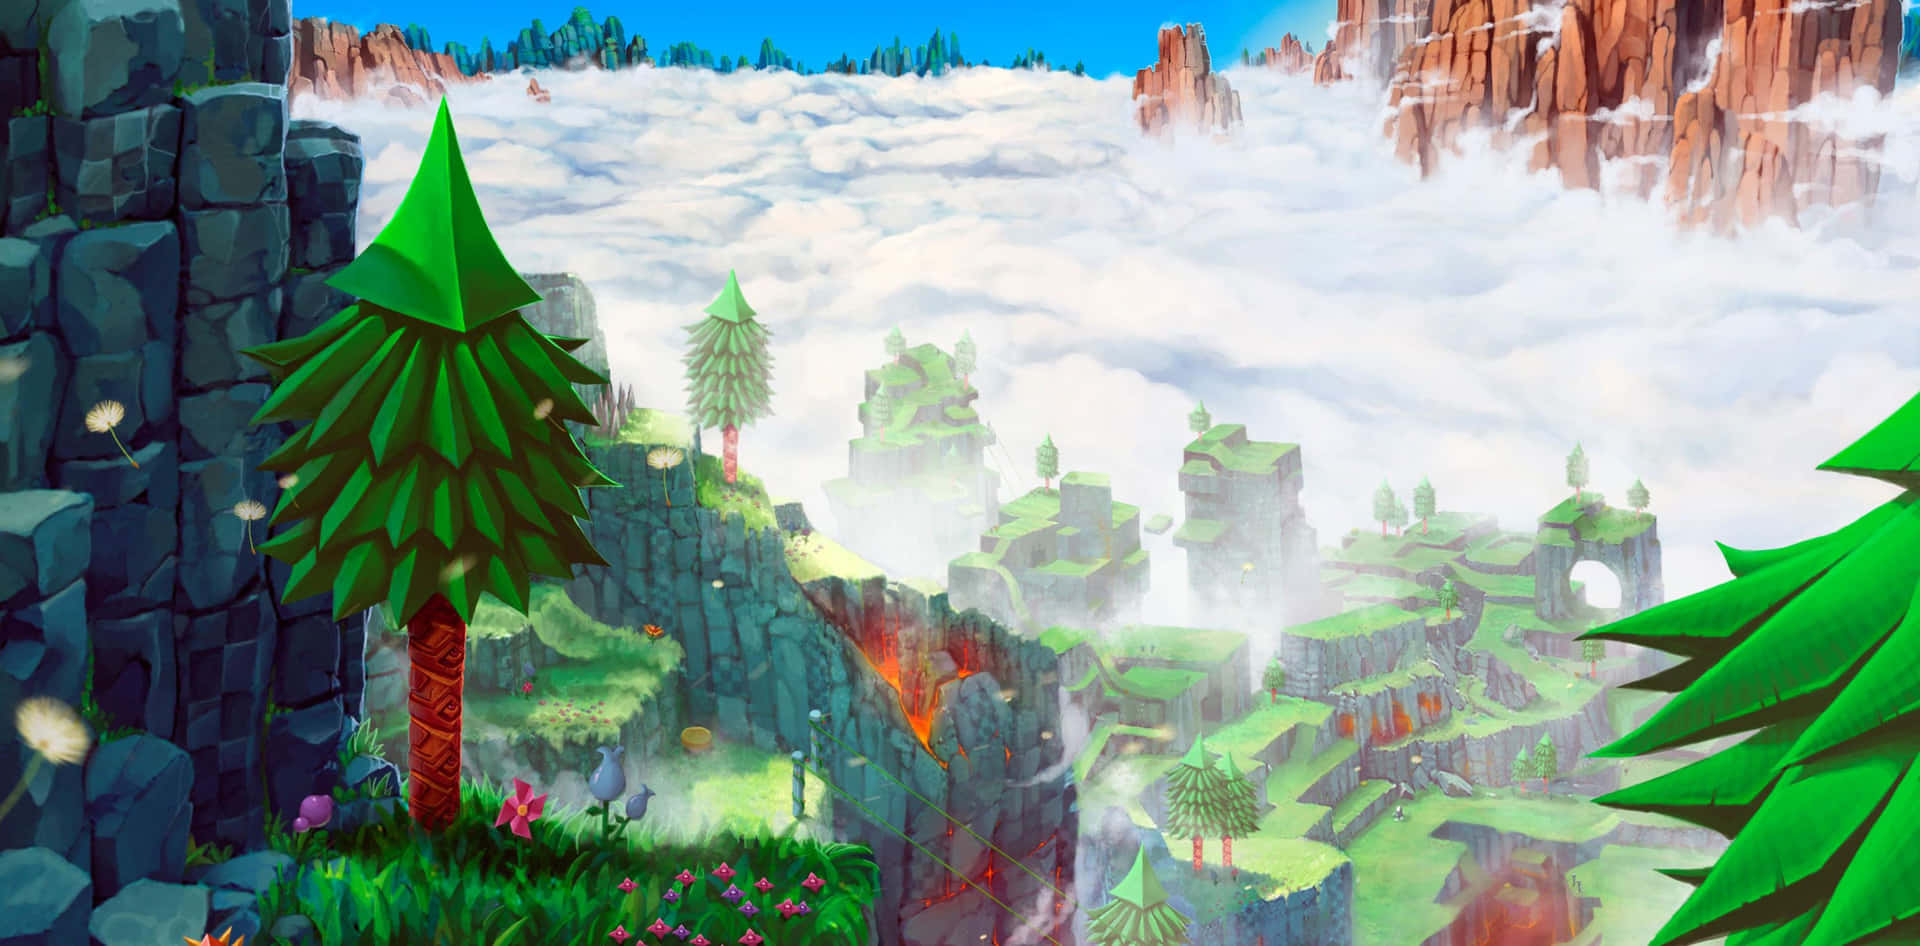 A Cartoon Of A Mountain With Trees And Clouds